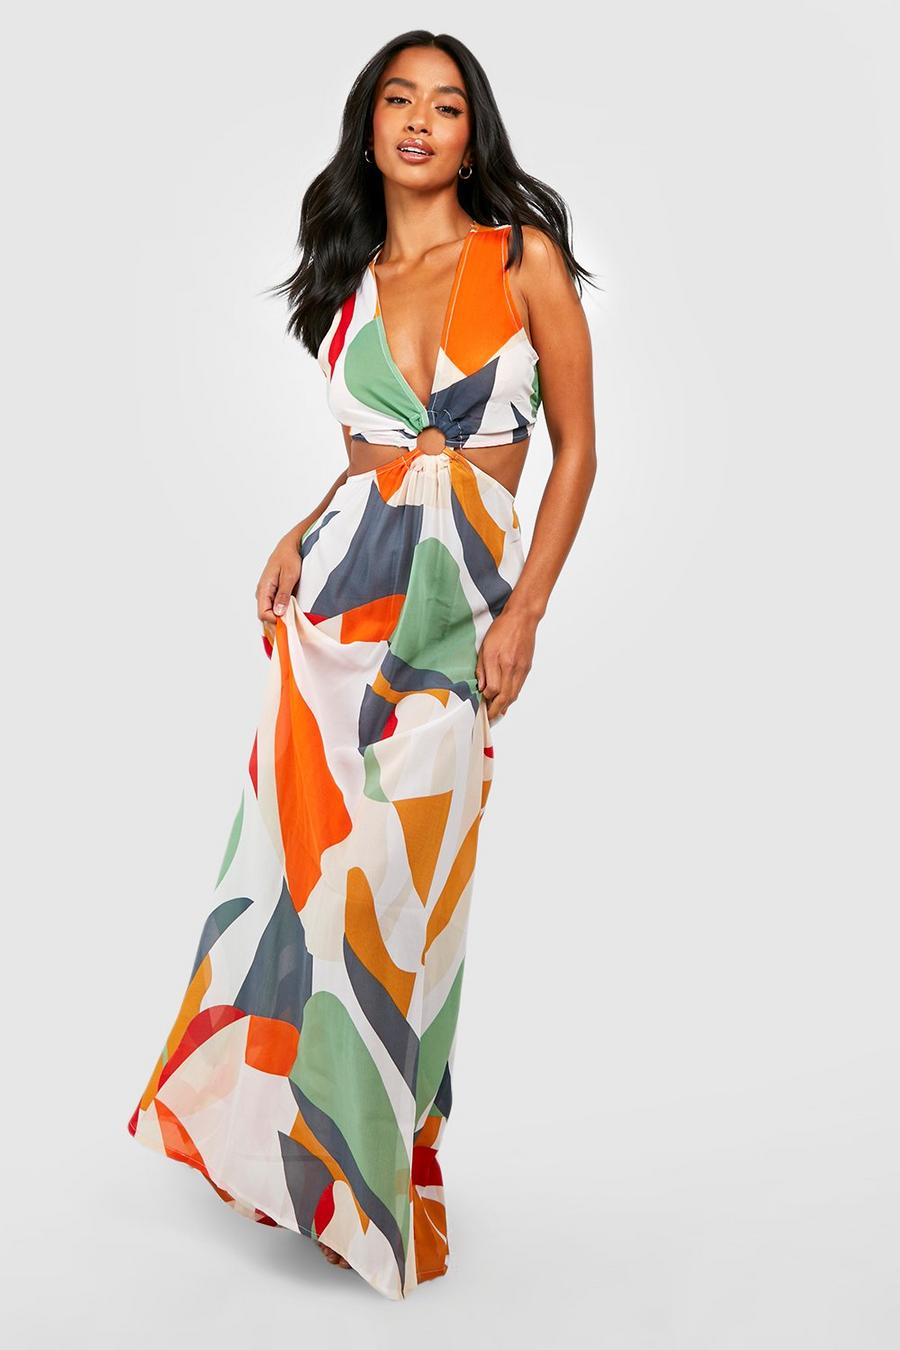 White Petite O-ring Printed Cut Out Beach Dress Gets image number 1